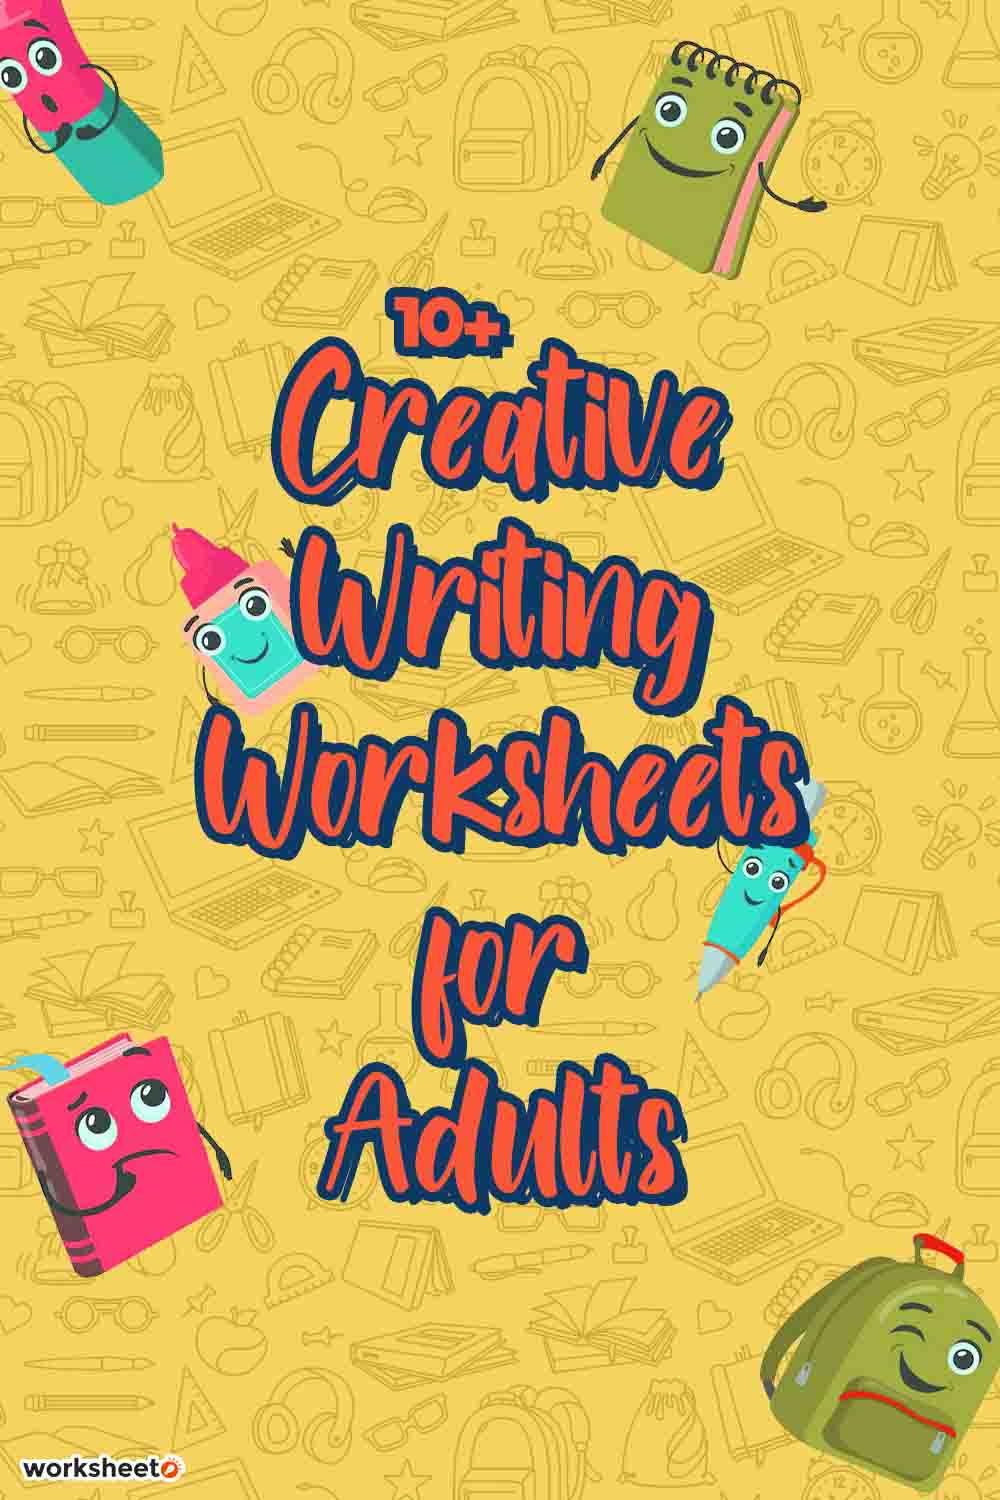 Creative Writing Worksheets for Adults